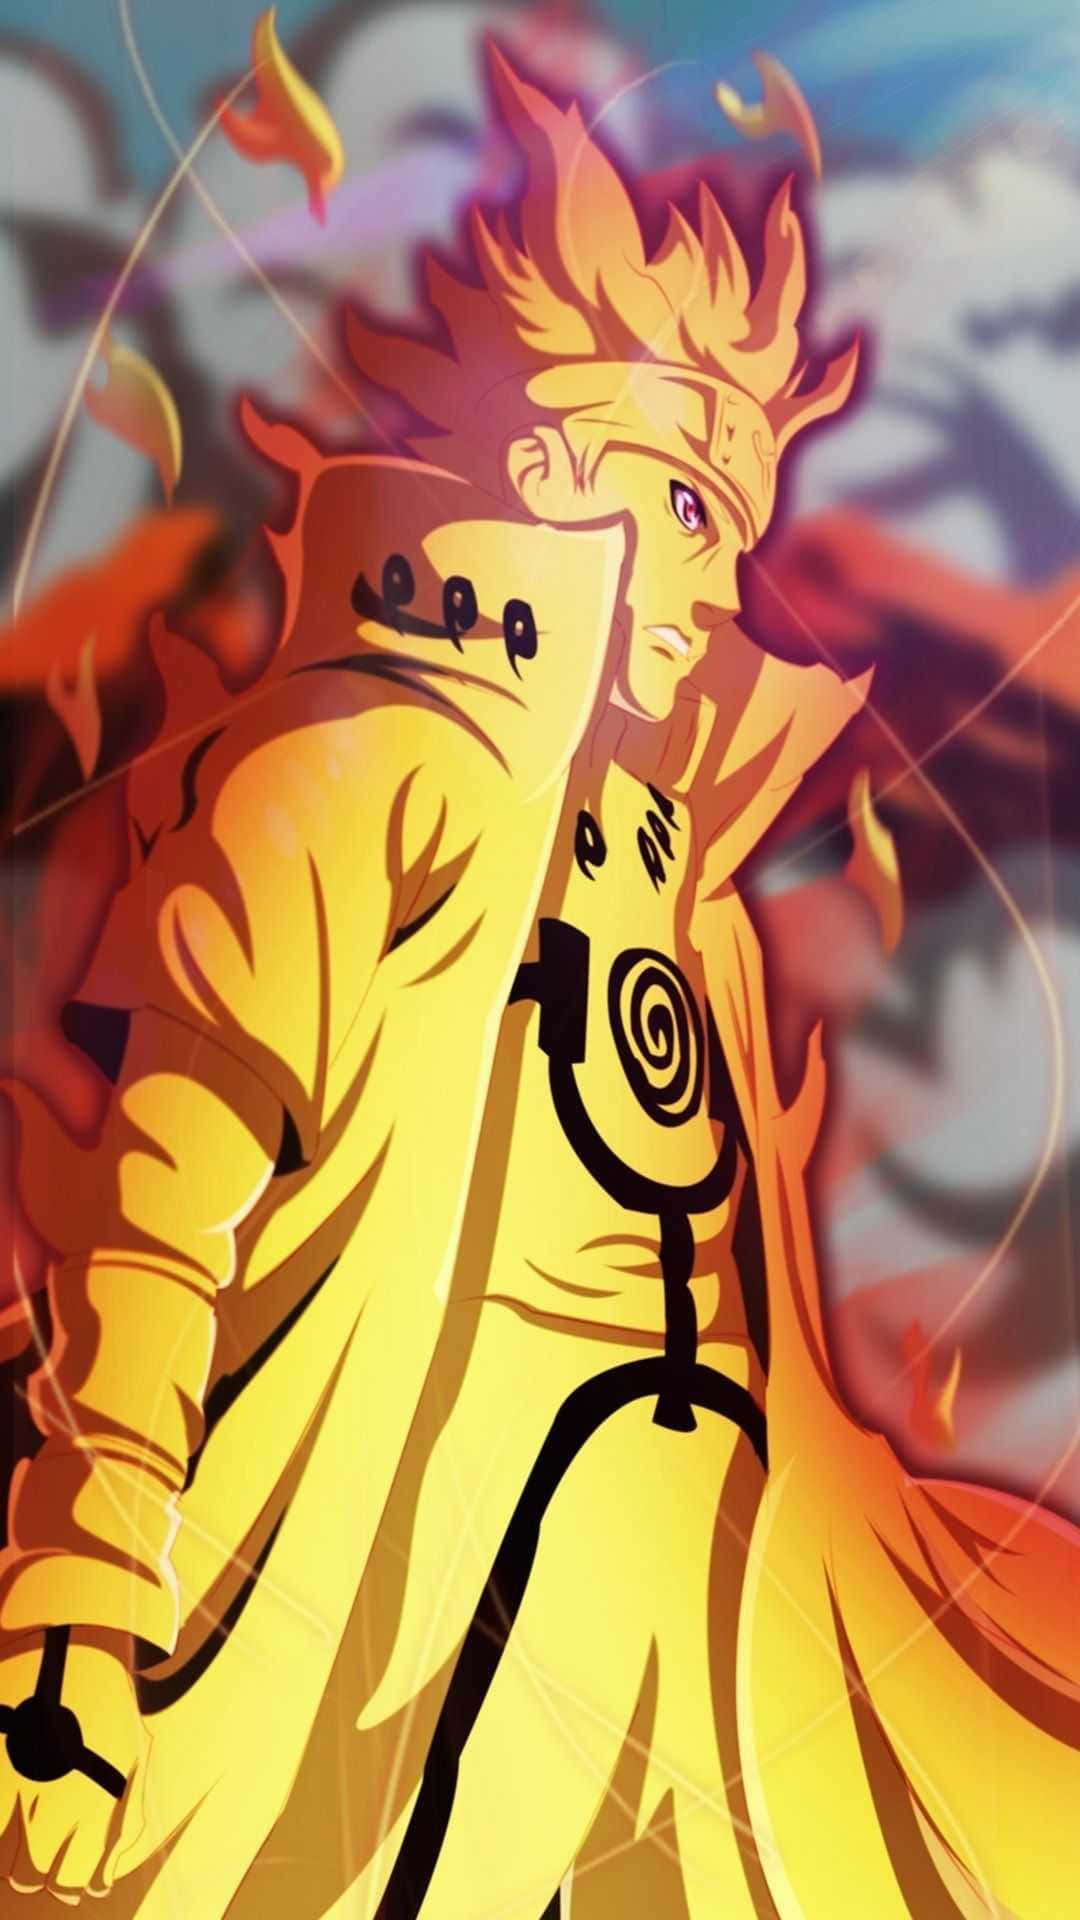 "Naruto - The Spark of Fire" Wallpaper